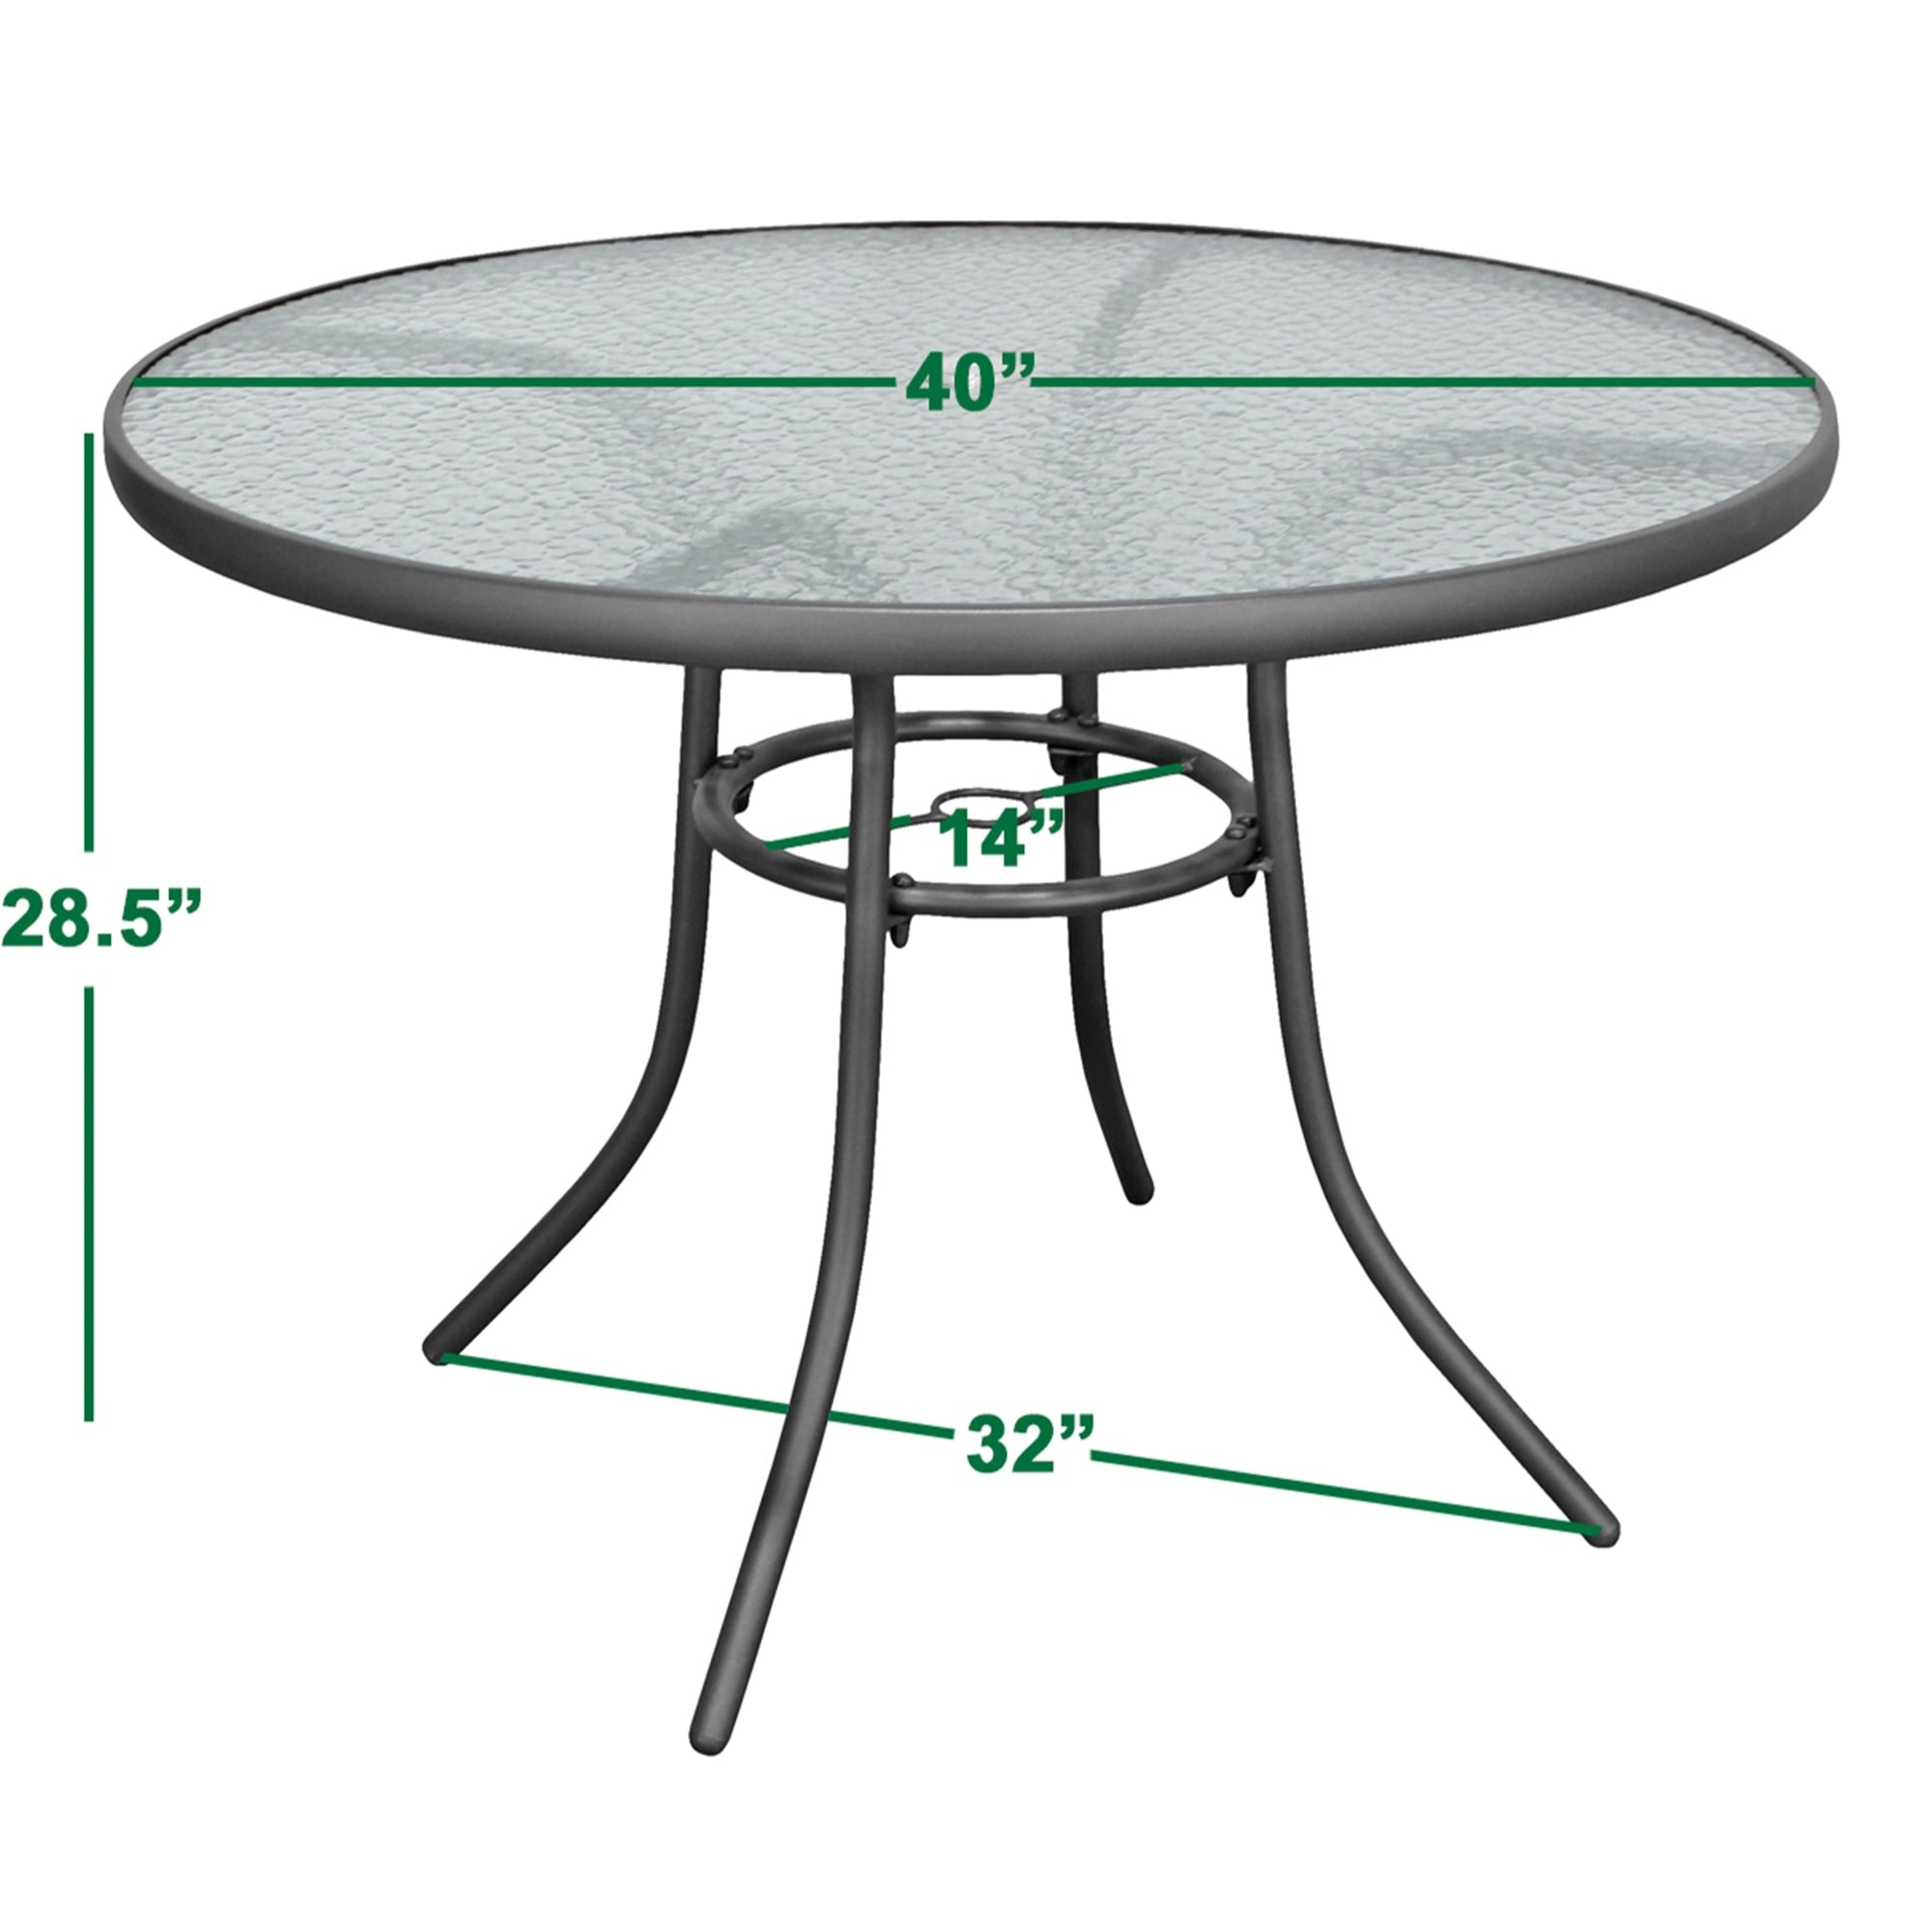 Rio Brands Sienna Metal Gray Round Patio Glass Top Table, 40-Inch